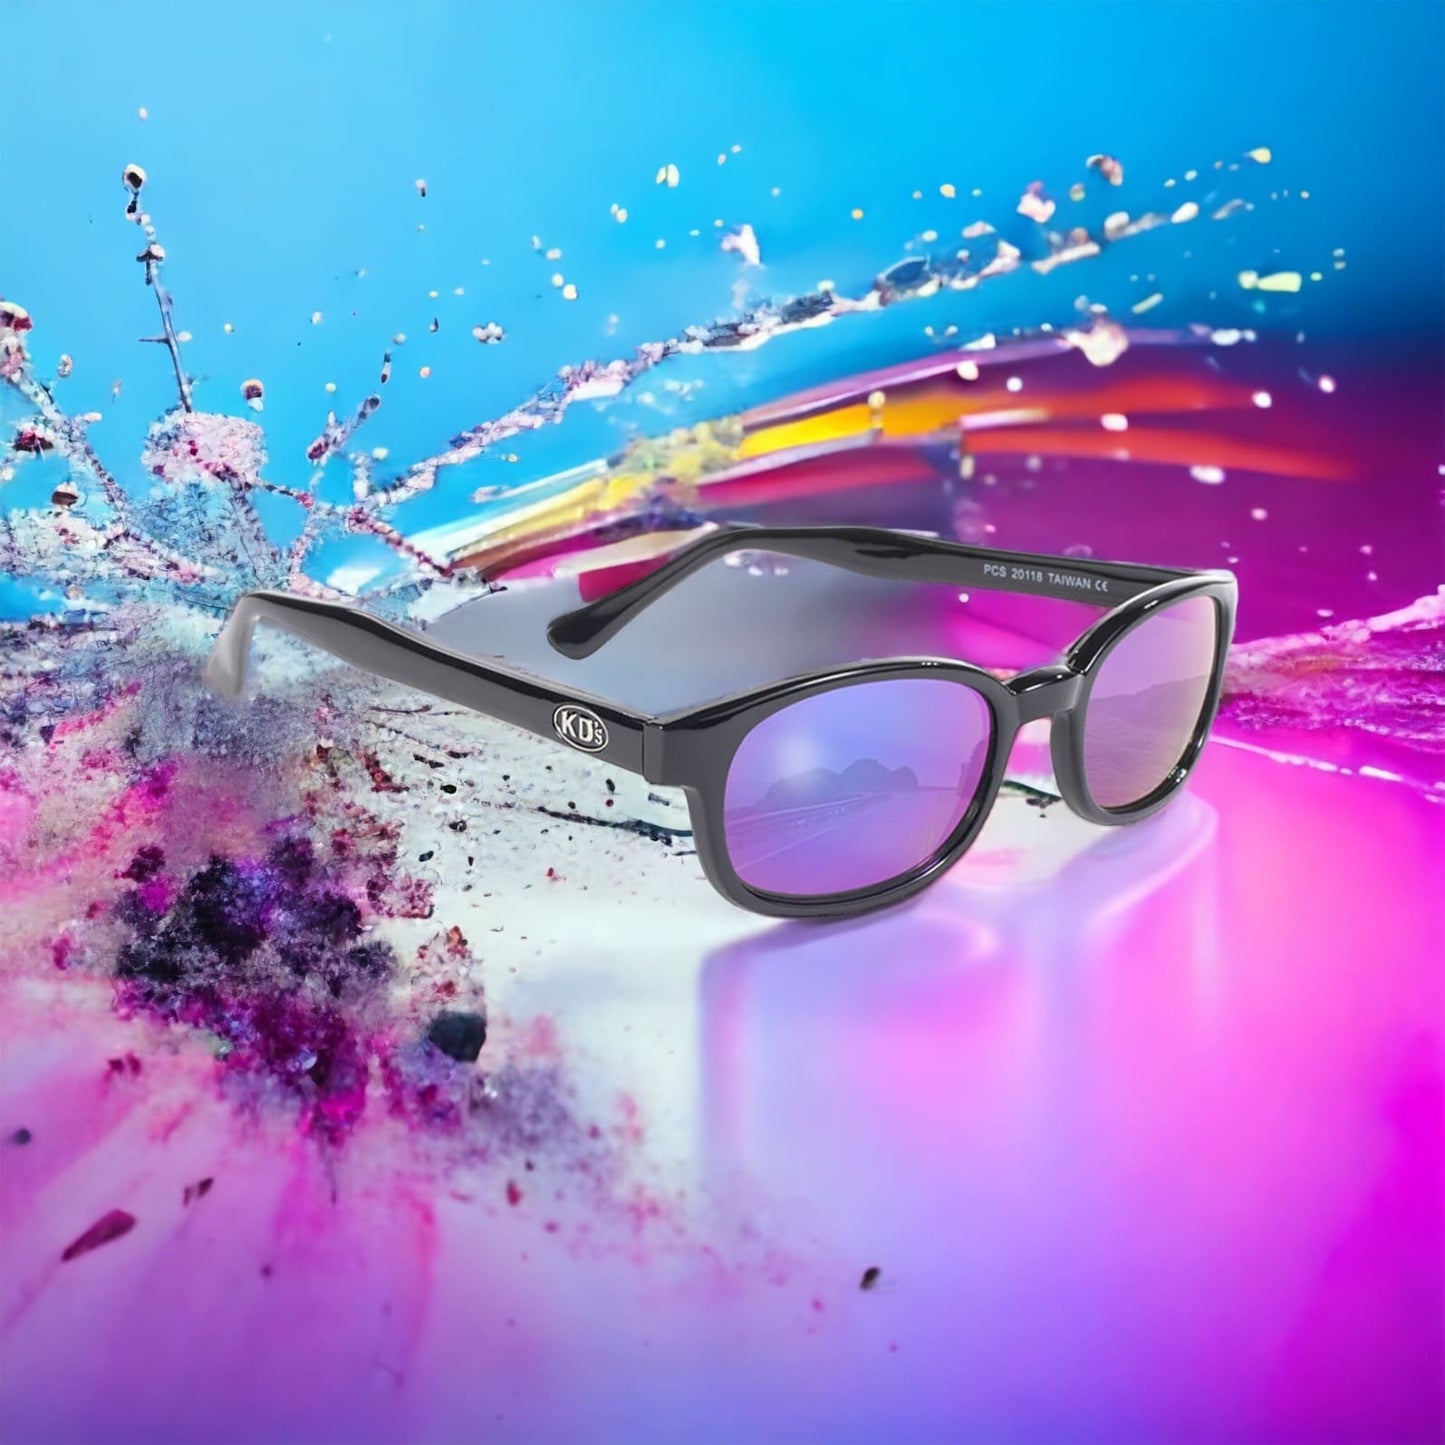 KD's 20118 sunglasses that fit under a motorcycle or ski helmet. With a classic black frame and iridescent mirror lenses in an explosion of colors.